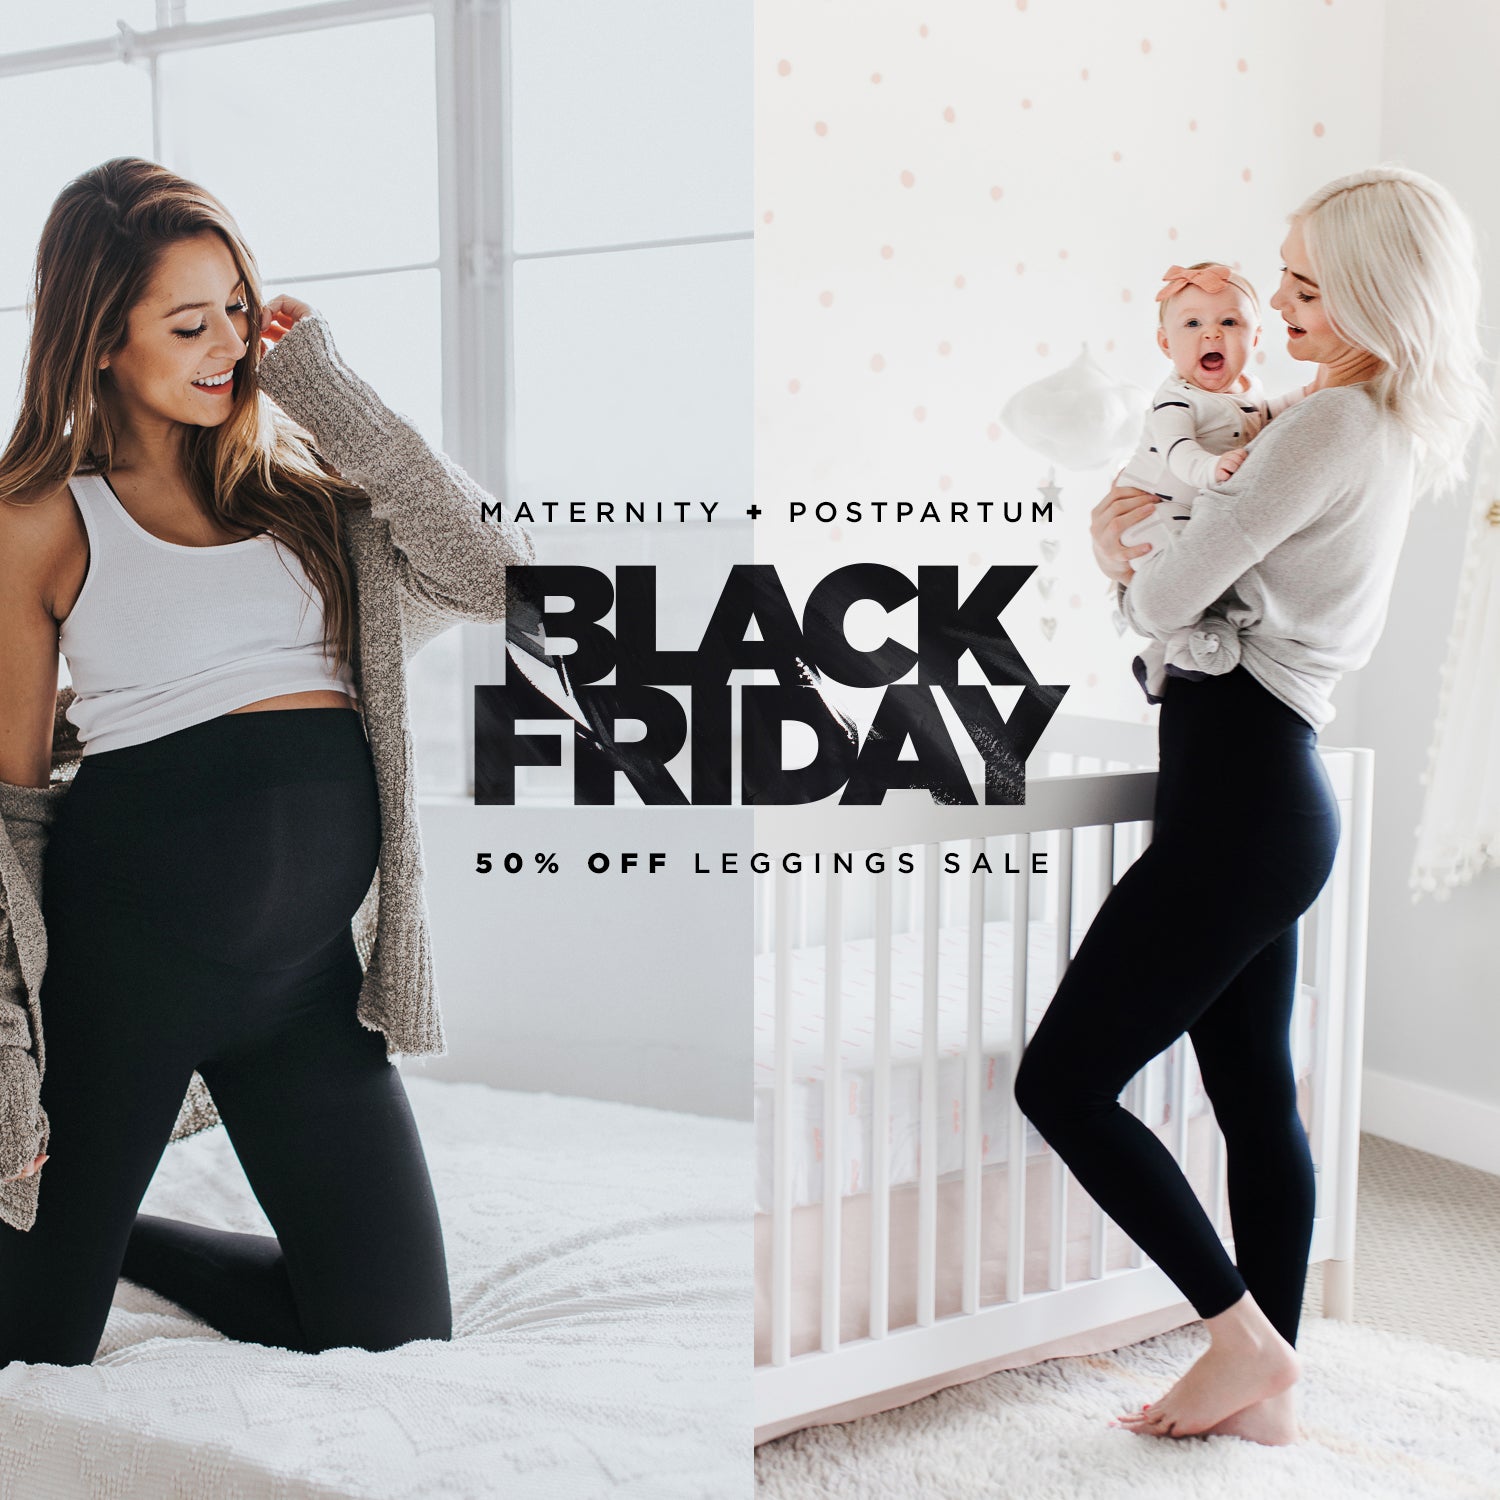 BLANQI BLACK FRIDAY // Get Pre-Access to 50% off Maternity + Postpartu